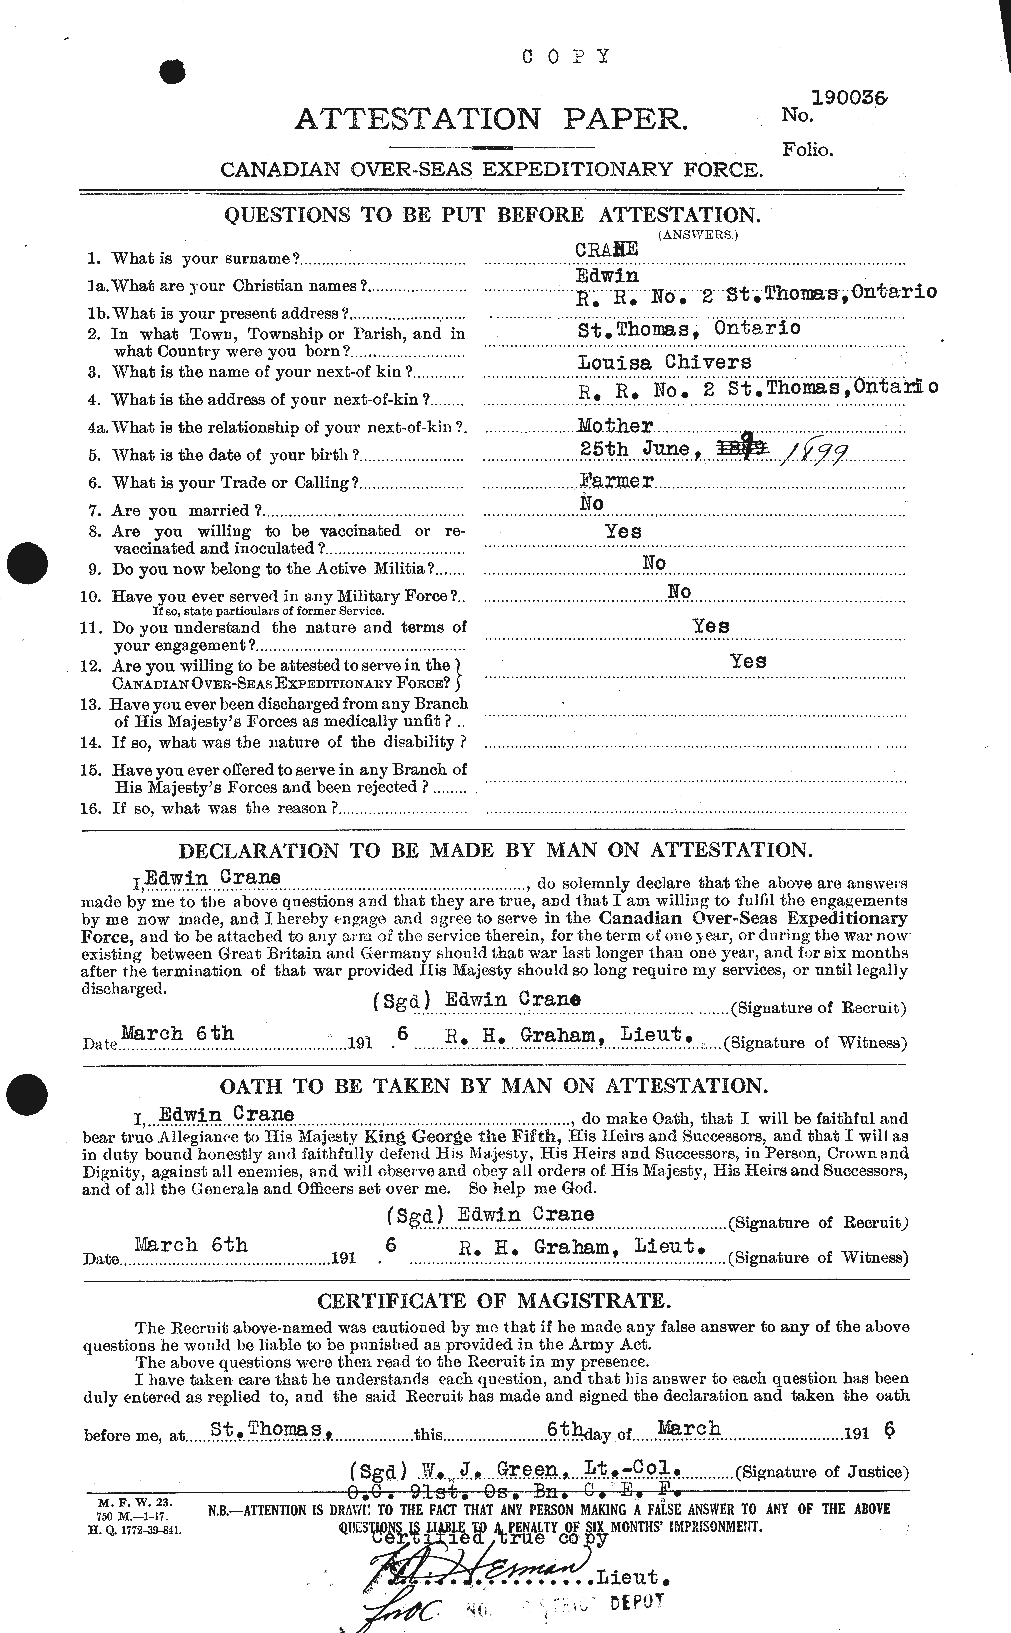 Personnel Records of the First World War - CEF 062018a